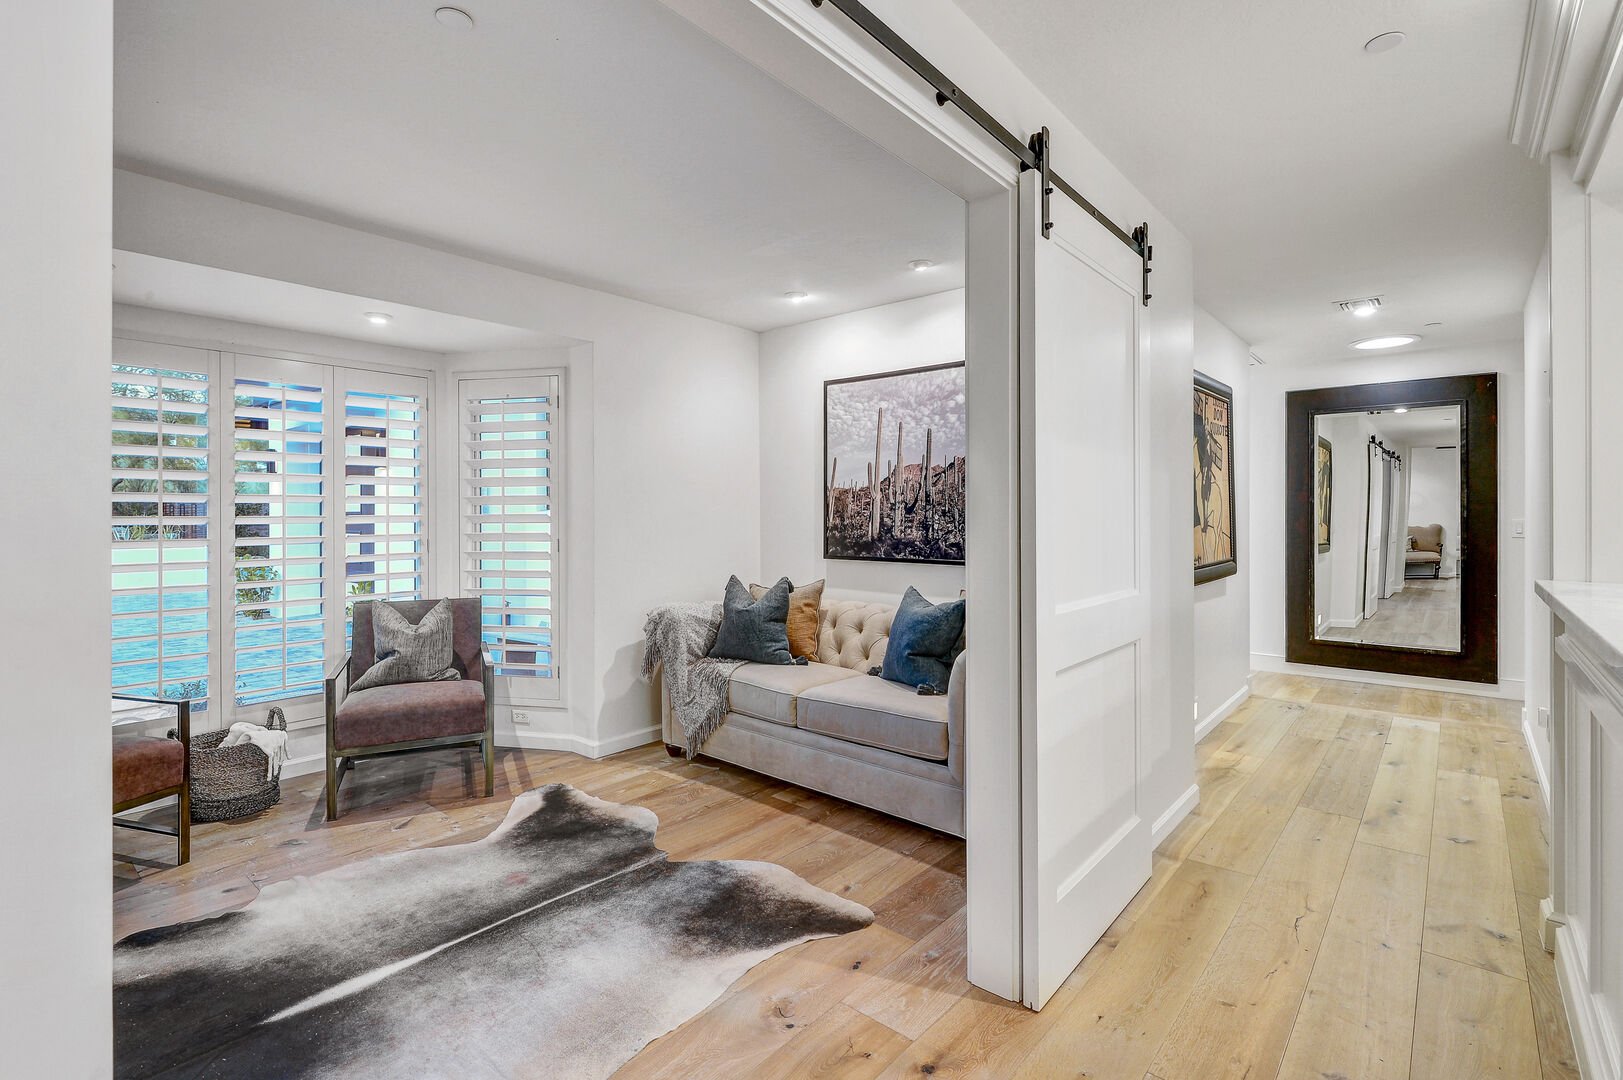 The inviting office space and the gracefully designed hallway, guiding the path to the enchanting east wing, luxurious master bedroom, and the allure of the upper floor.